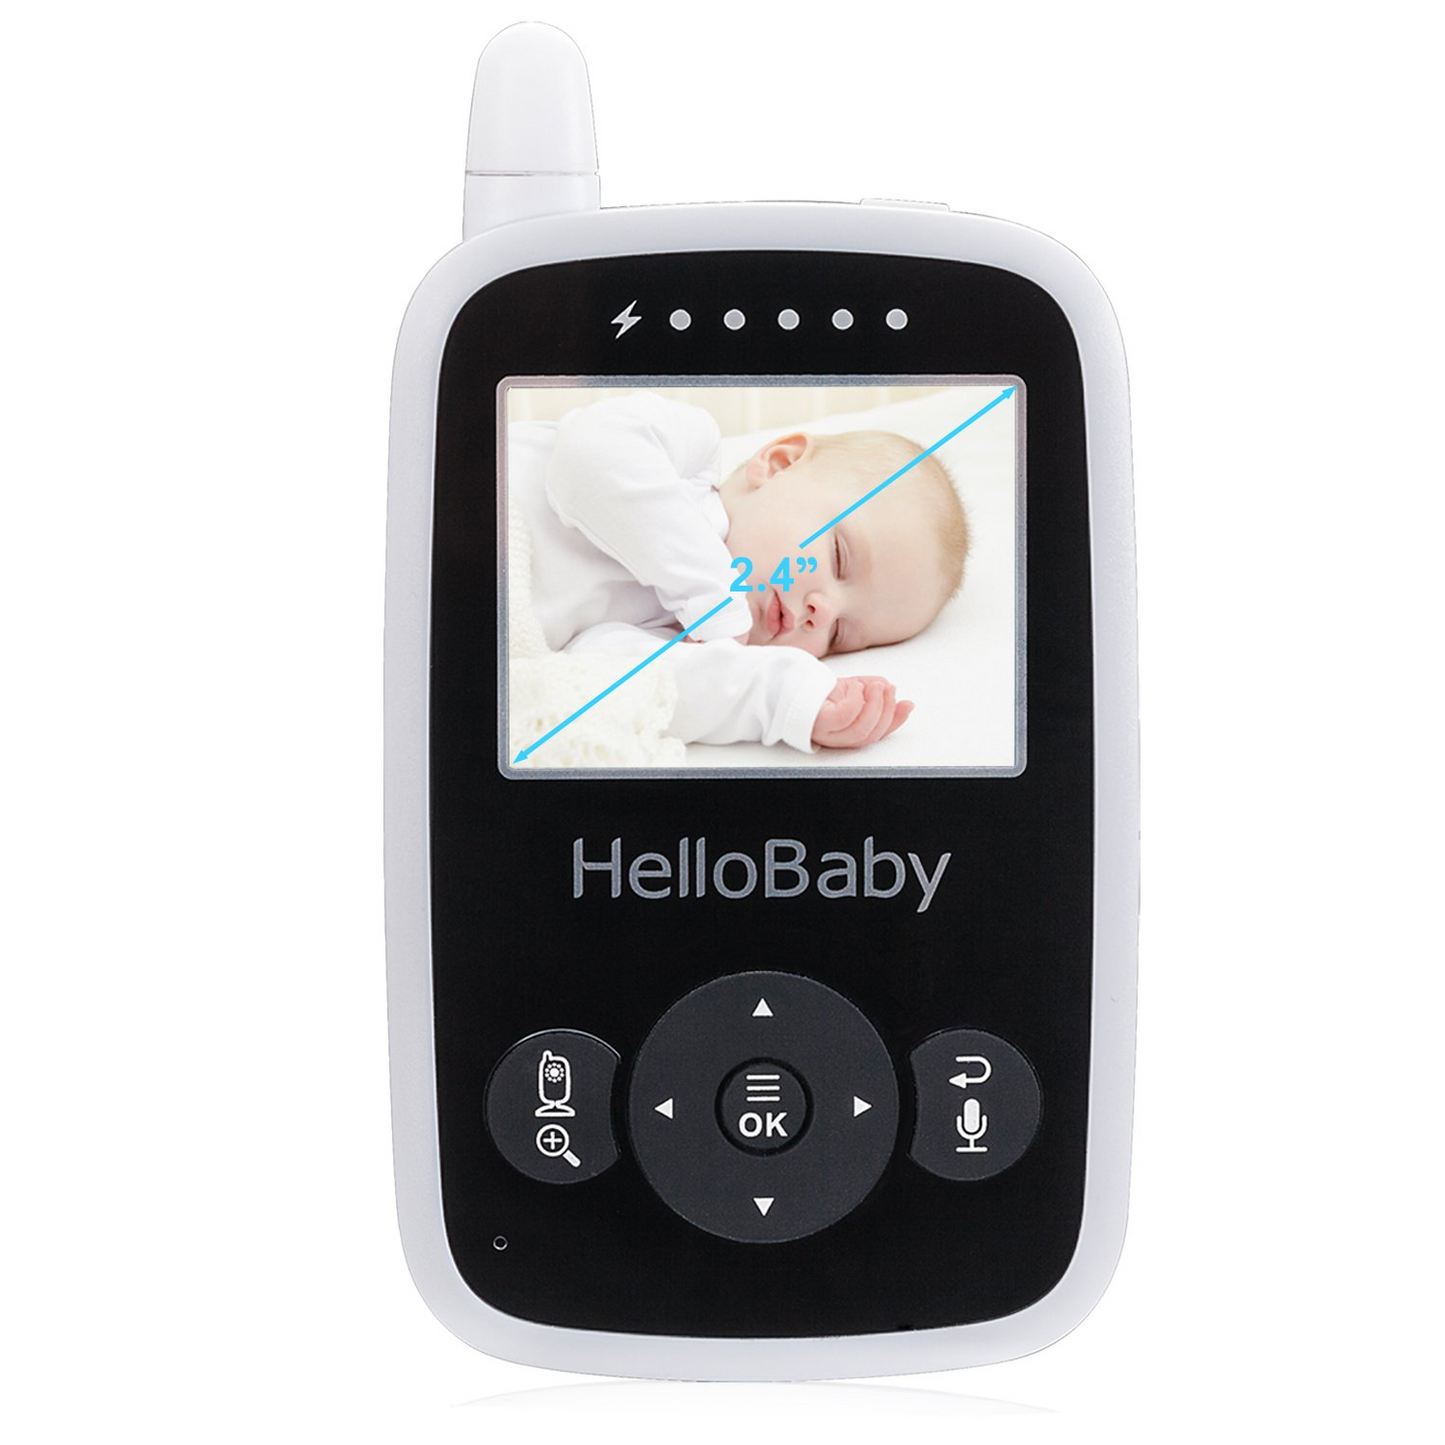 hellobaby best baby monitor - HelloBaby HB24 replacement Parent Unit  